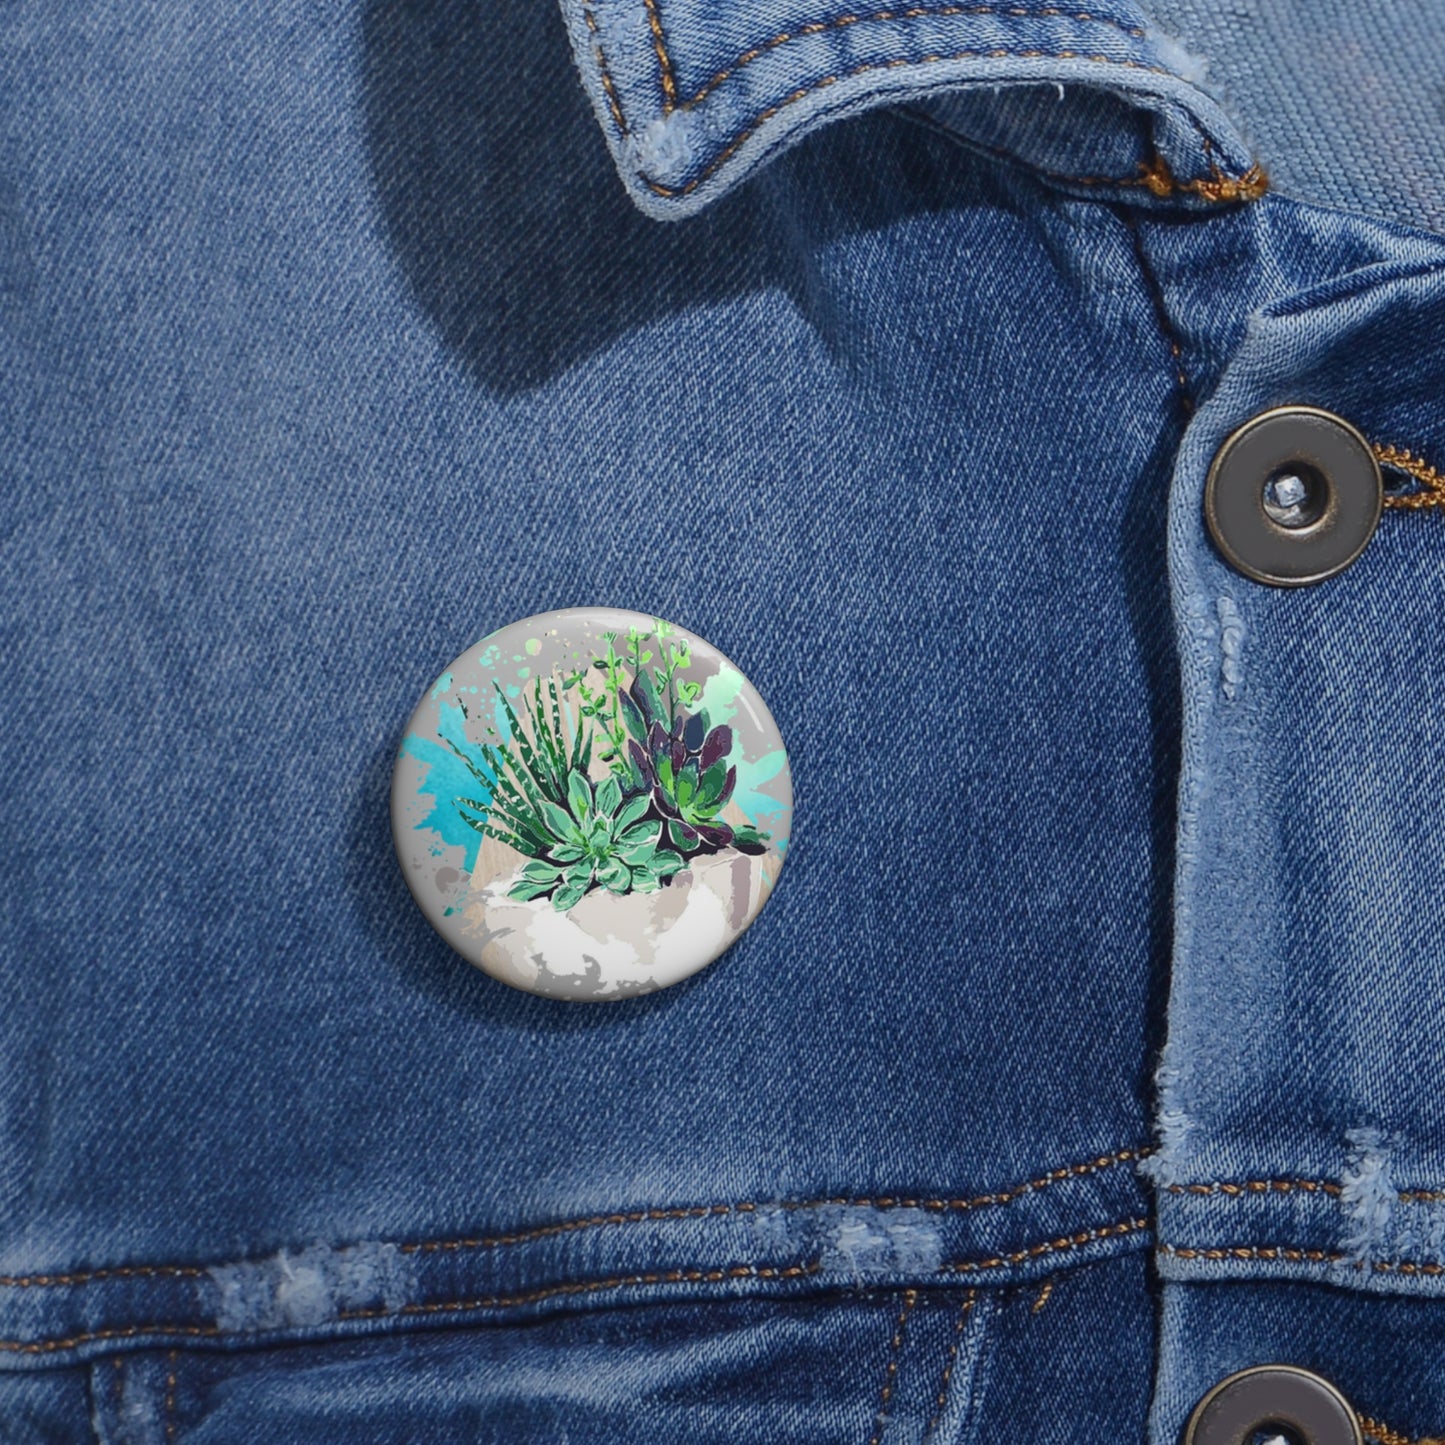 Cool Succulents  -  Pin Buttons